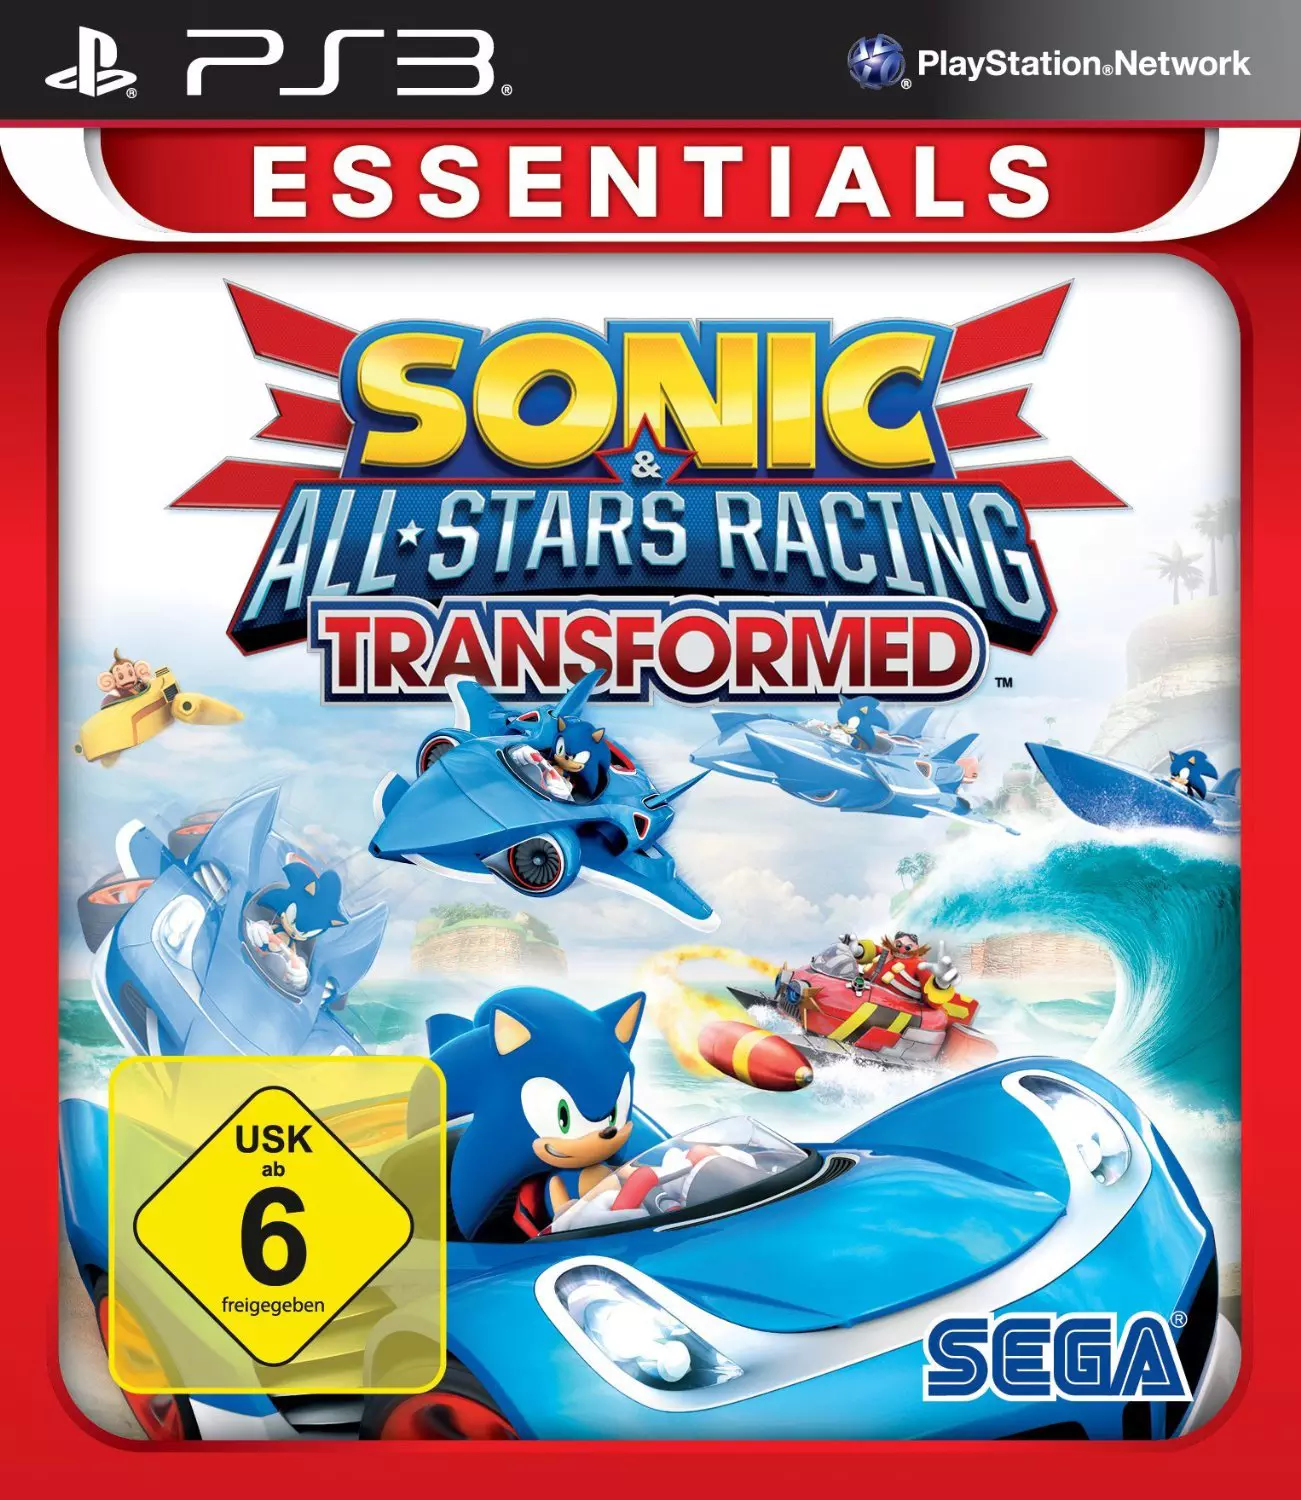 Sonic All-Star Racing: Transformed Essentials